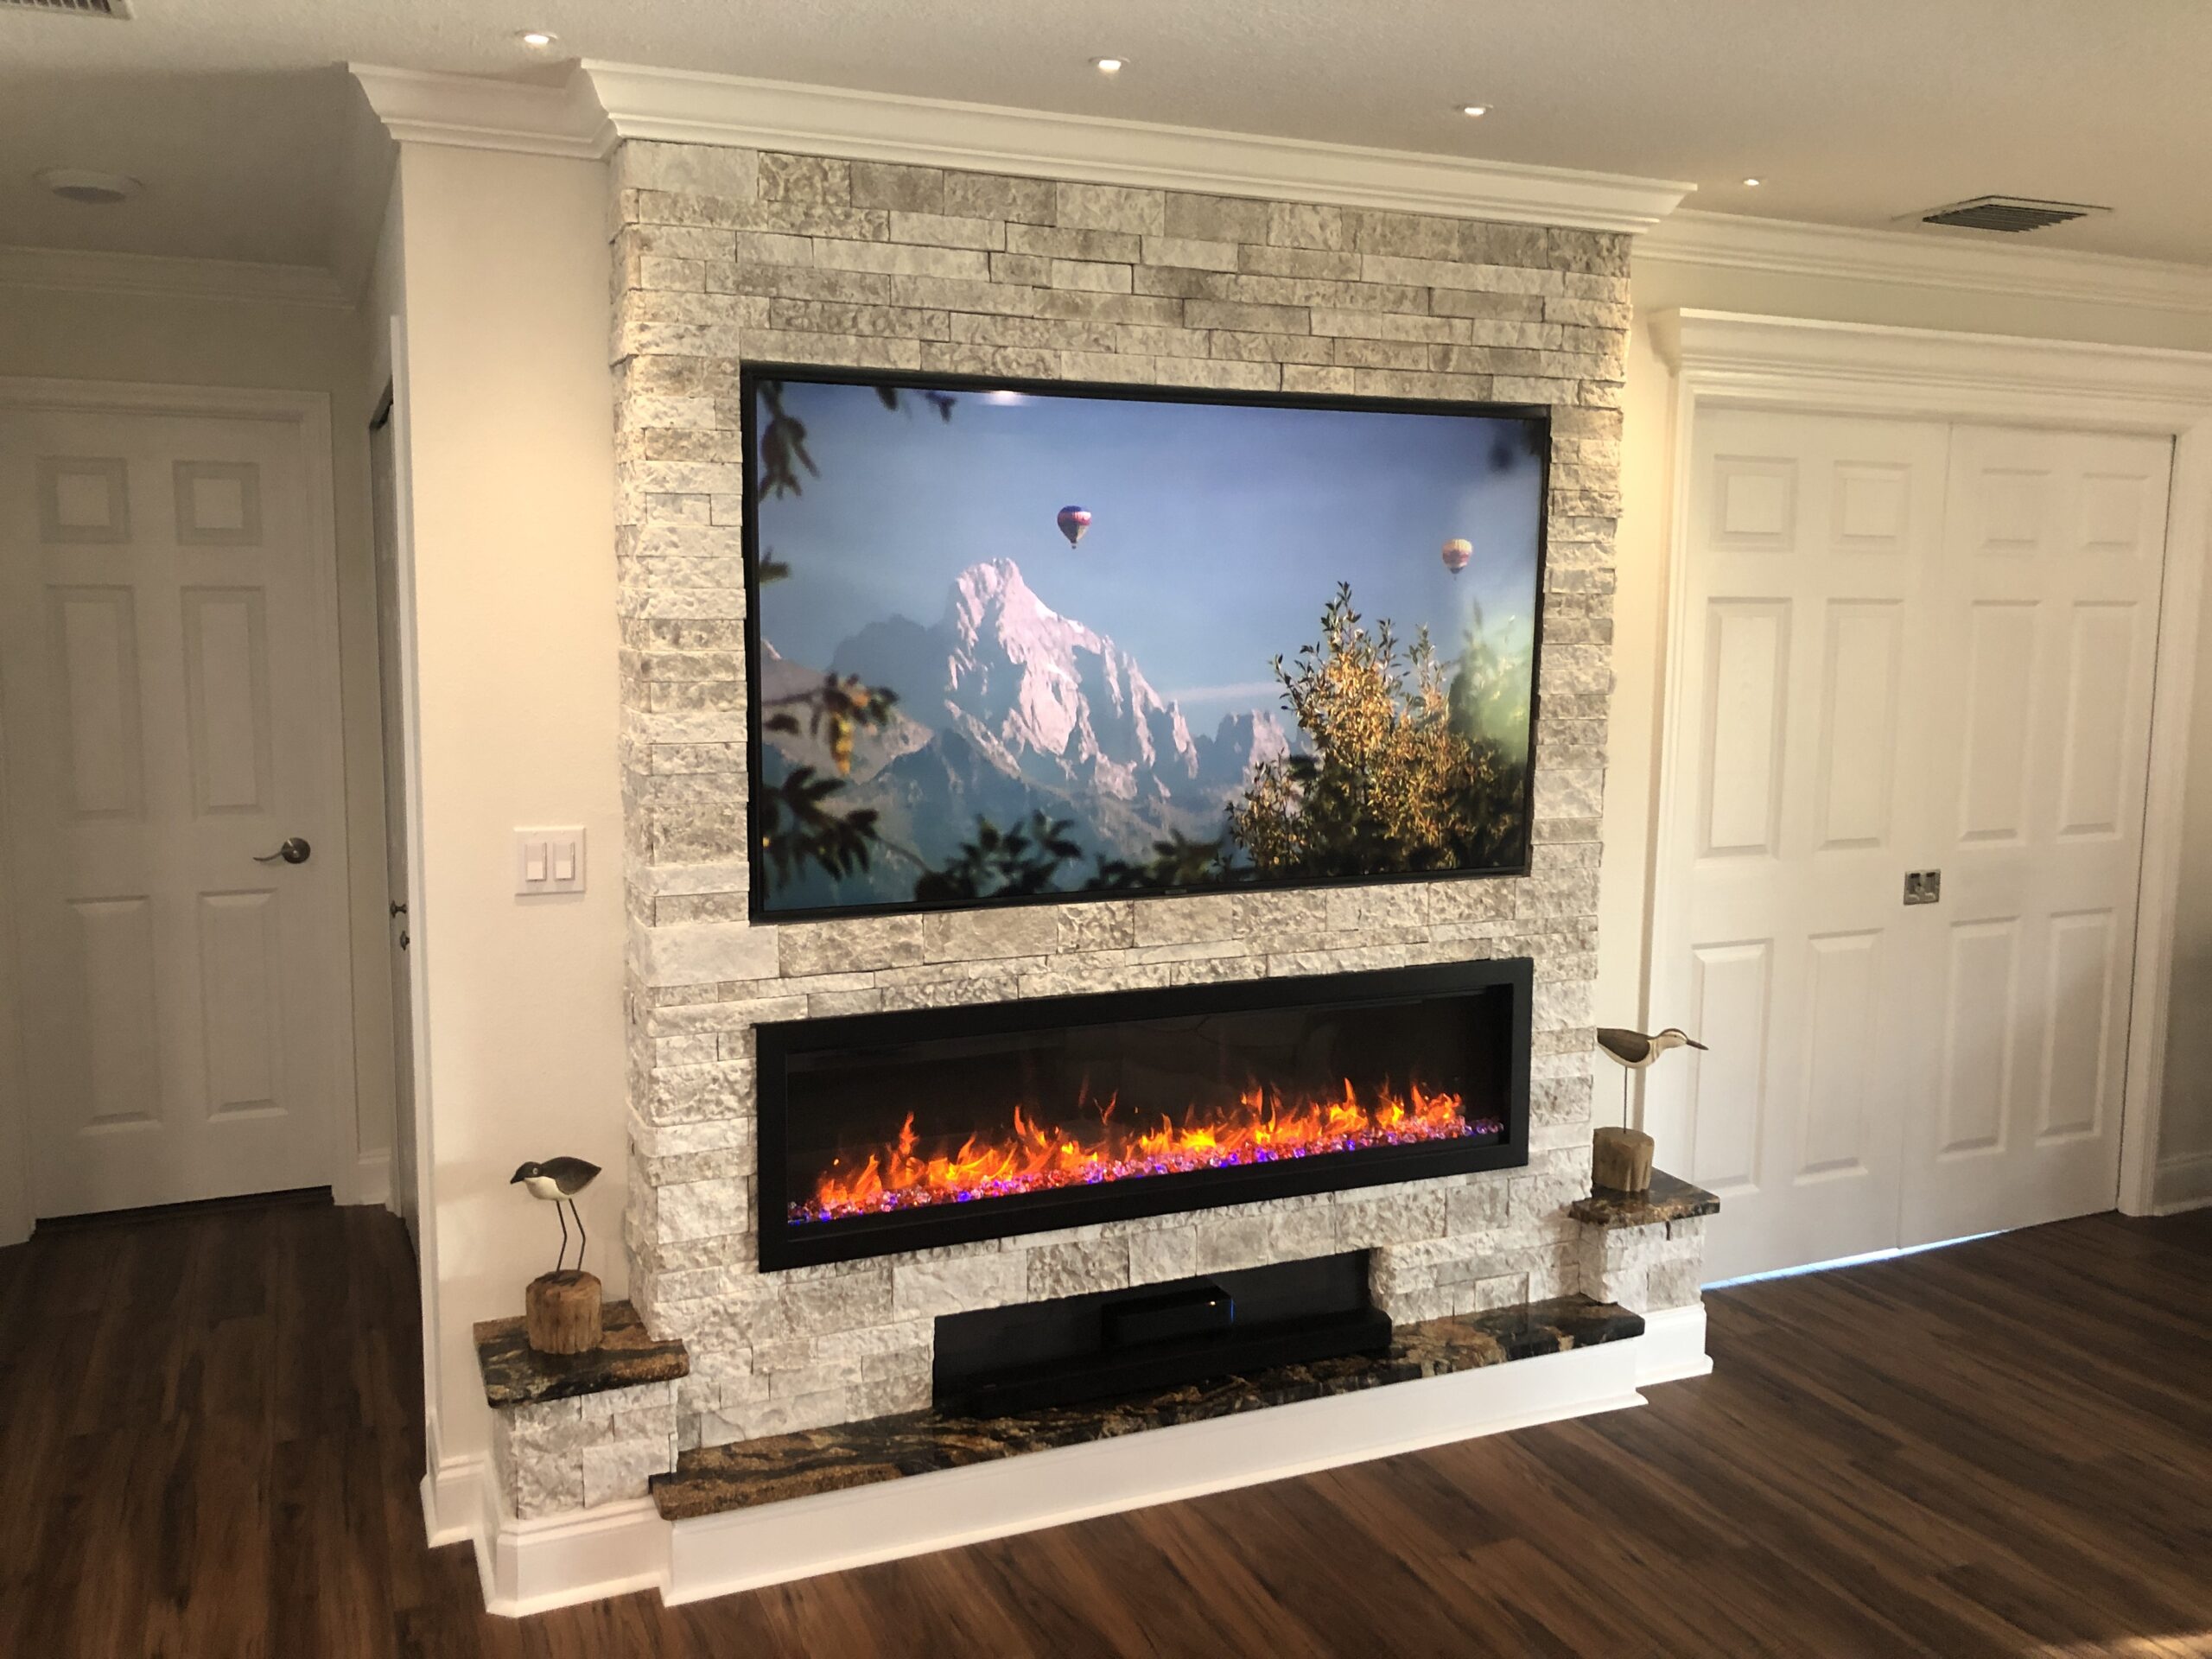 Electric fireplace in living room with custom light stone surround and tv mount